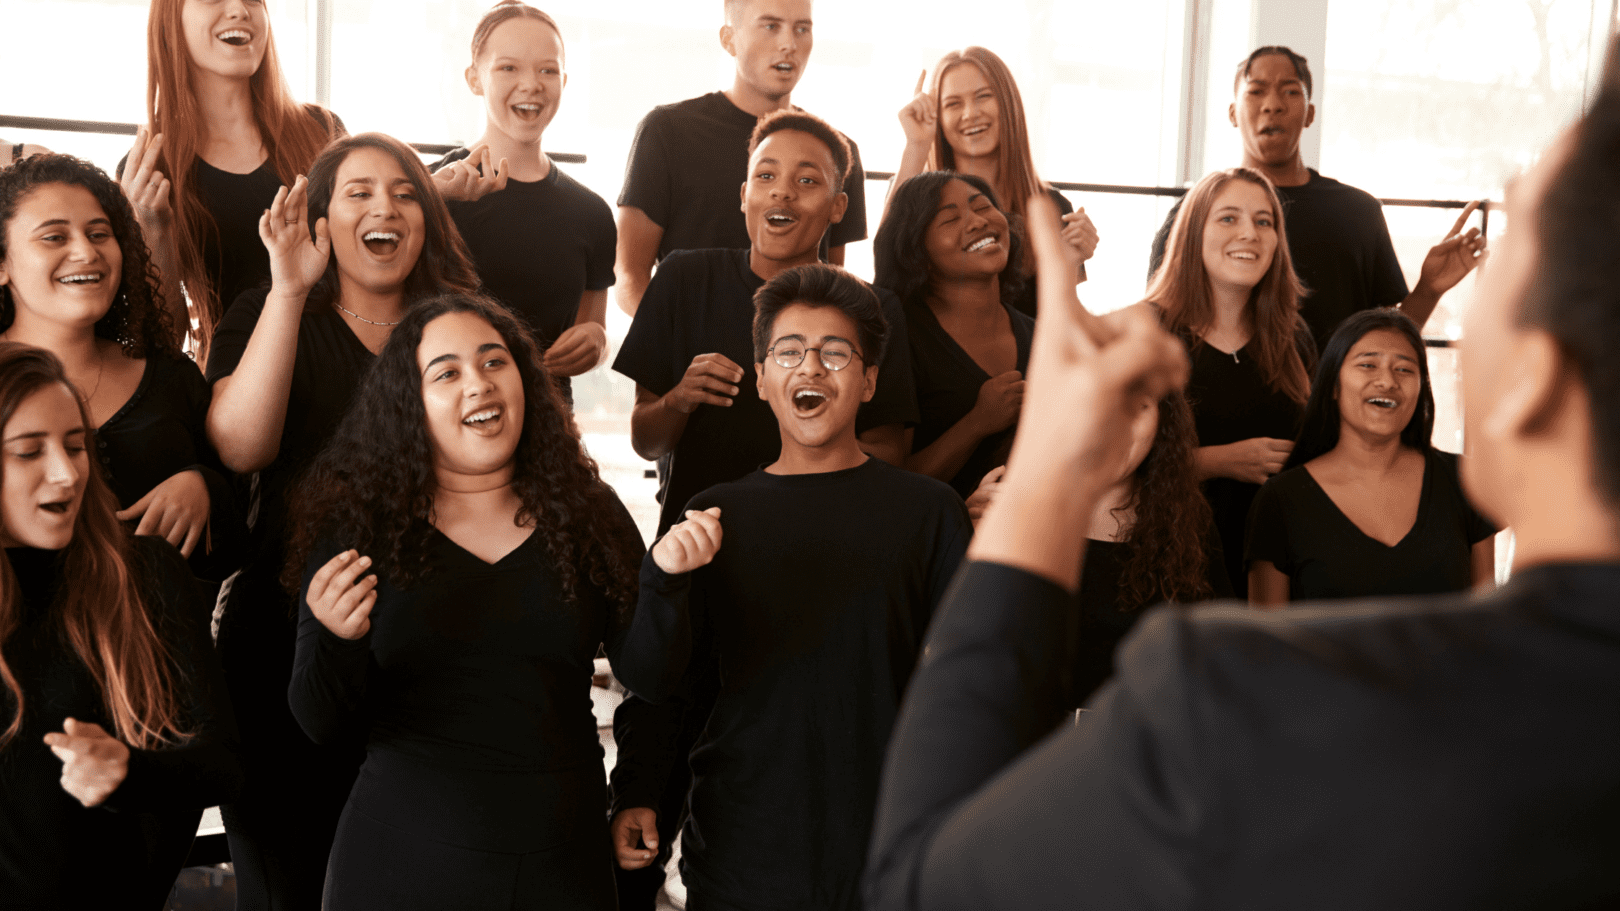 performance trip ideas for student choirs